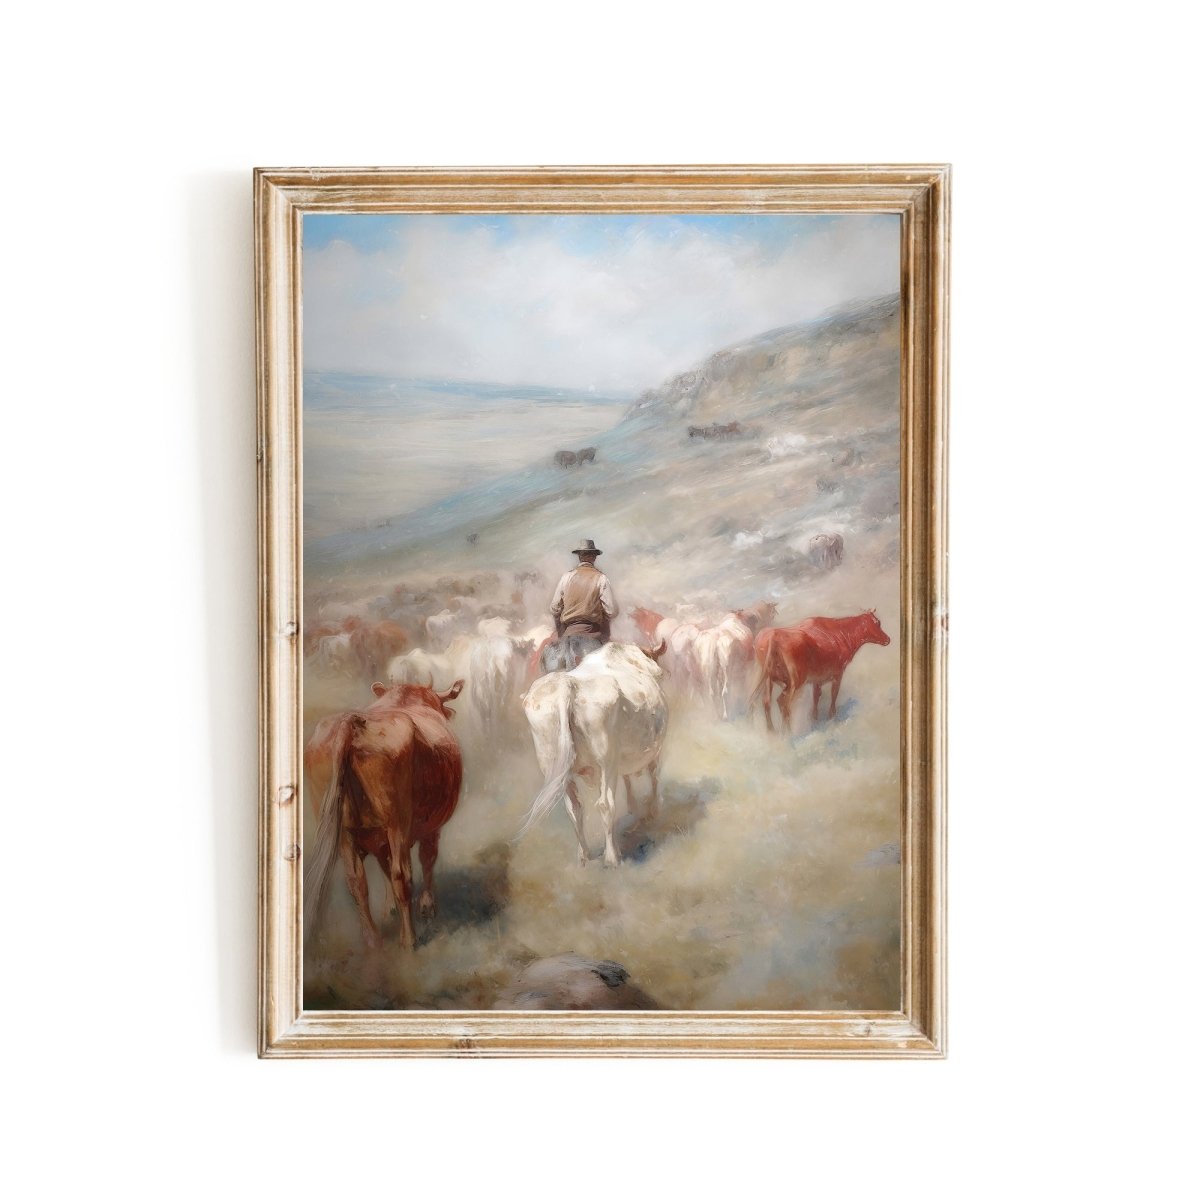 Vintage Wild West Wall Art Cowboy Tending Cattle Herd Down into Valley - Everything Pixel